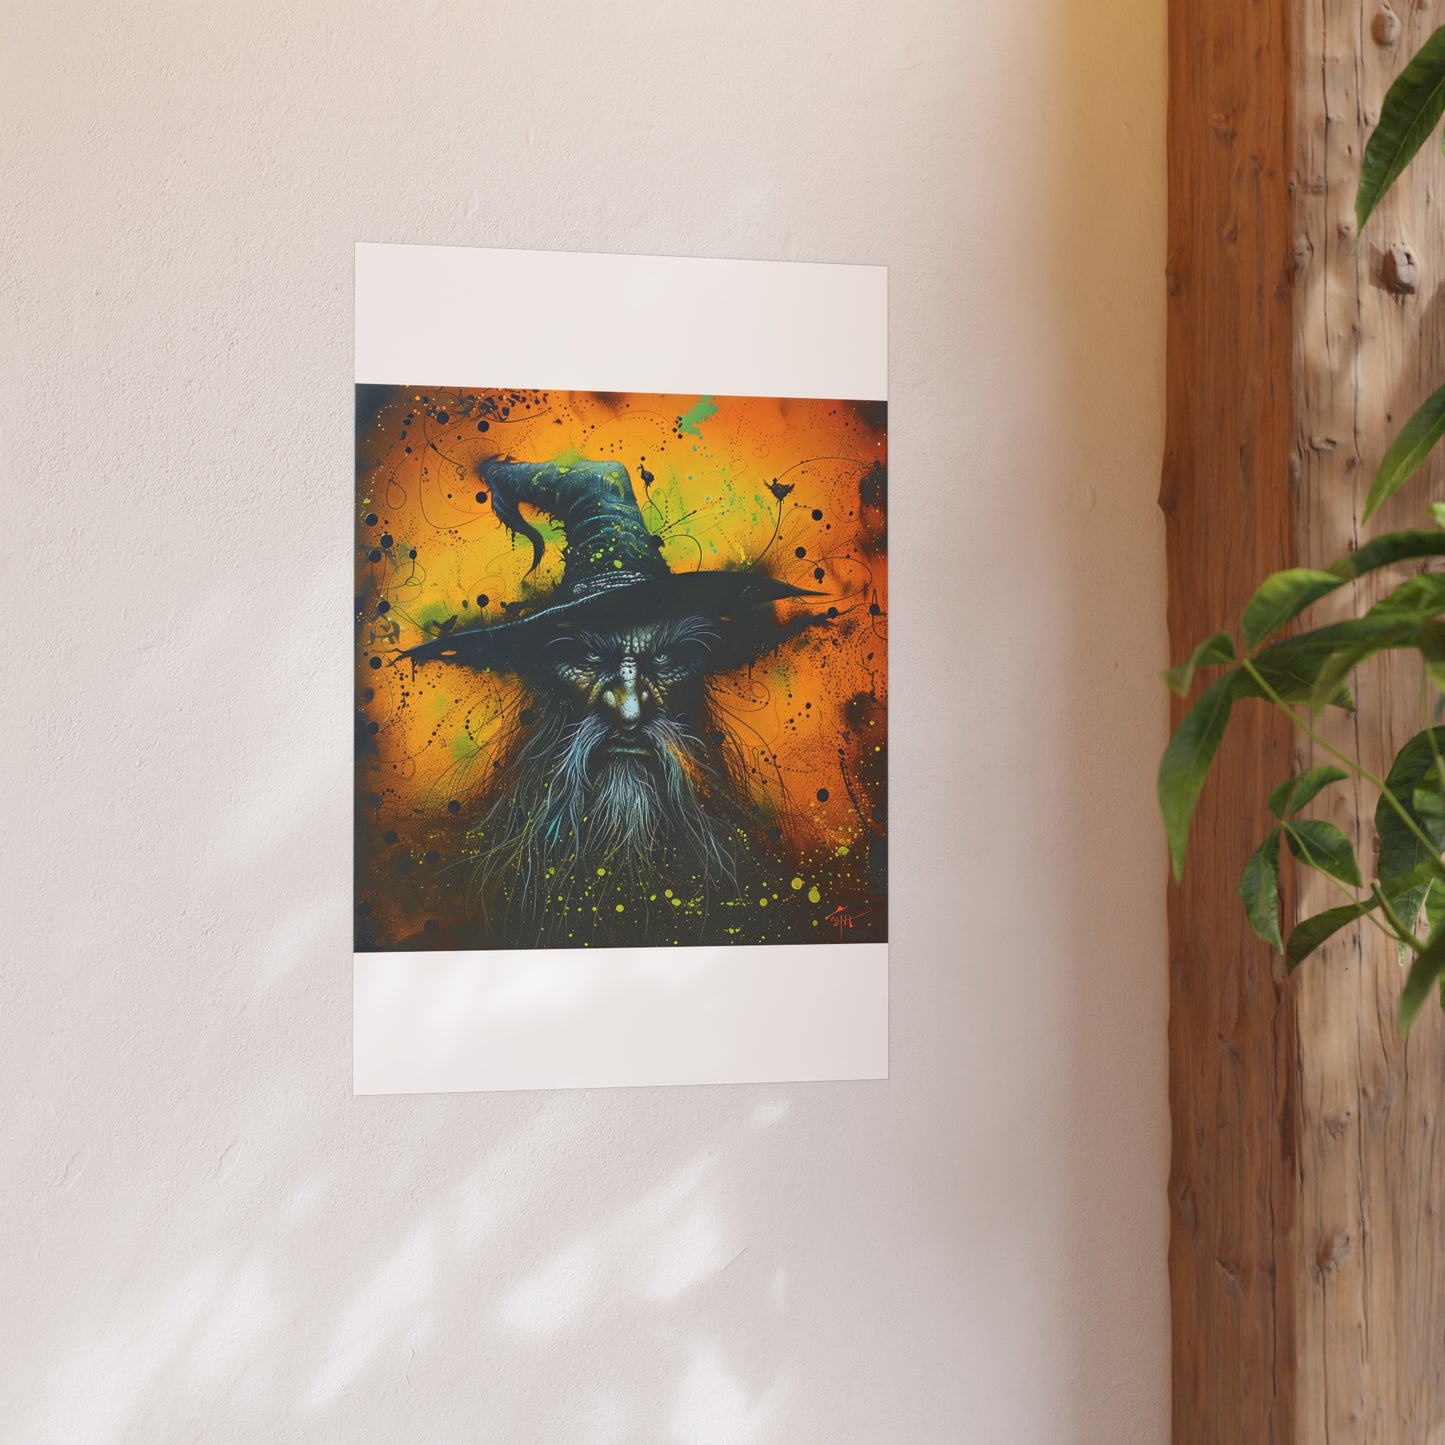 Satin and Archival Matte Posters: Wicked Wizard